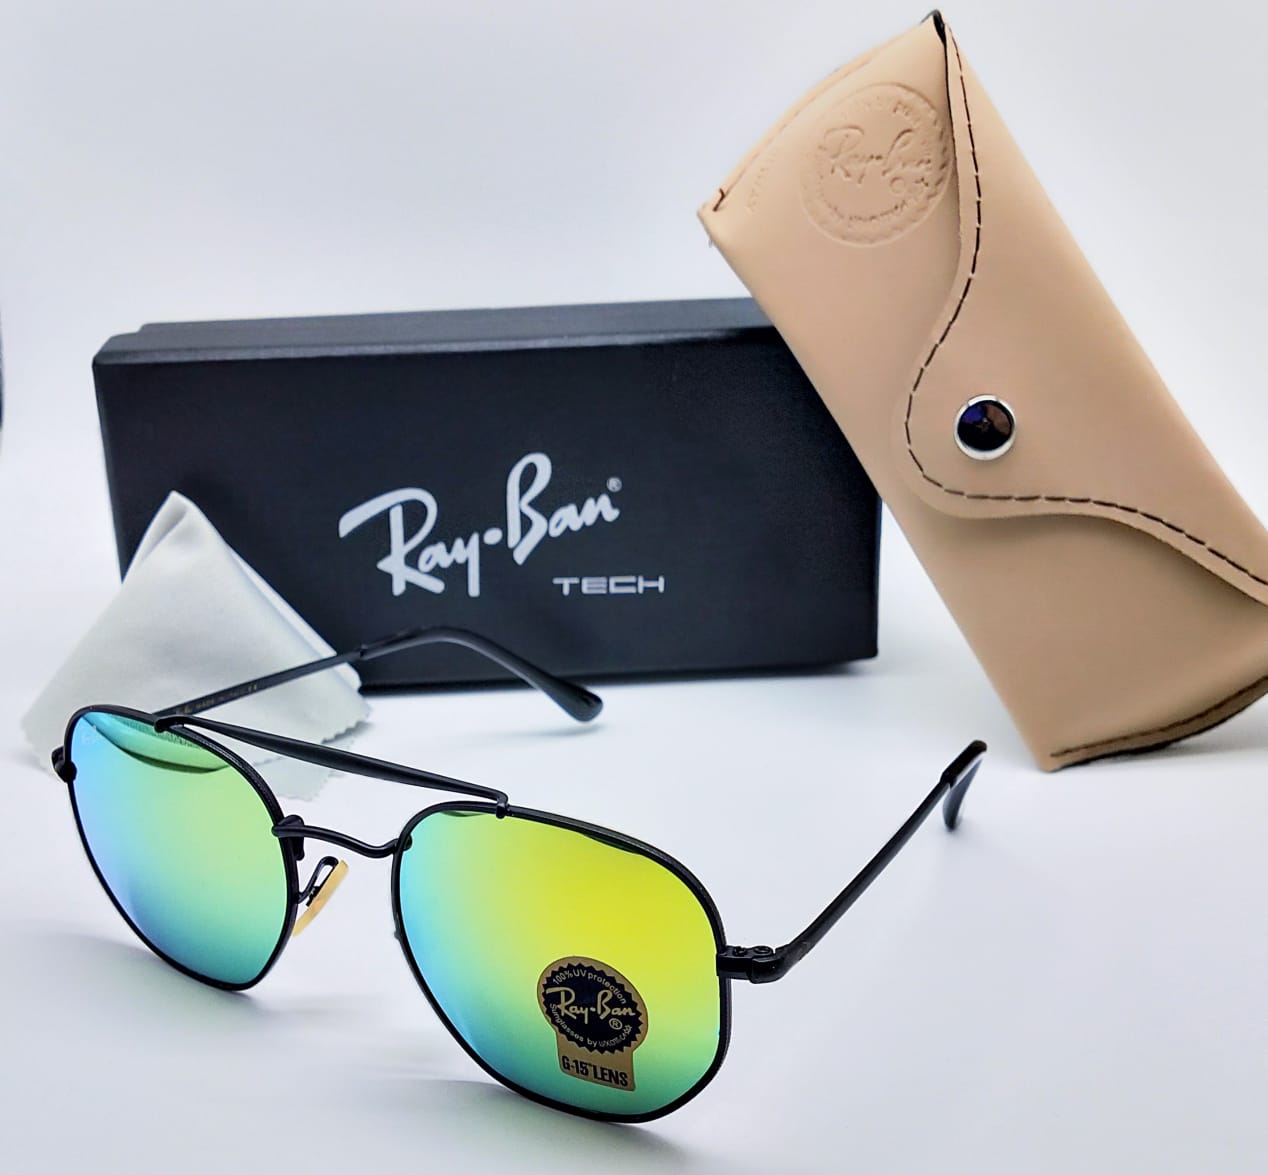 Rayban Brand New stylish Men's Sunglass Heavy Quality Light Green Color Glass With Black Frame RB-1113